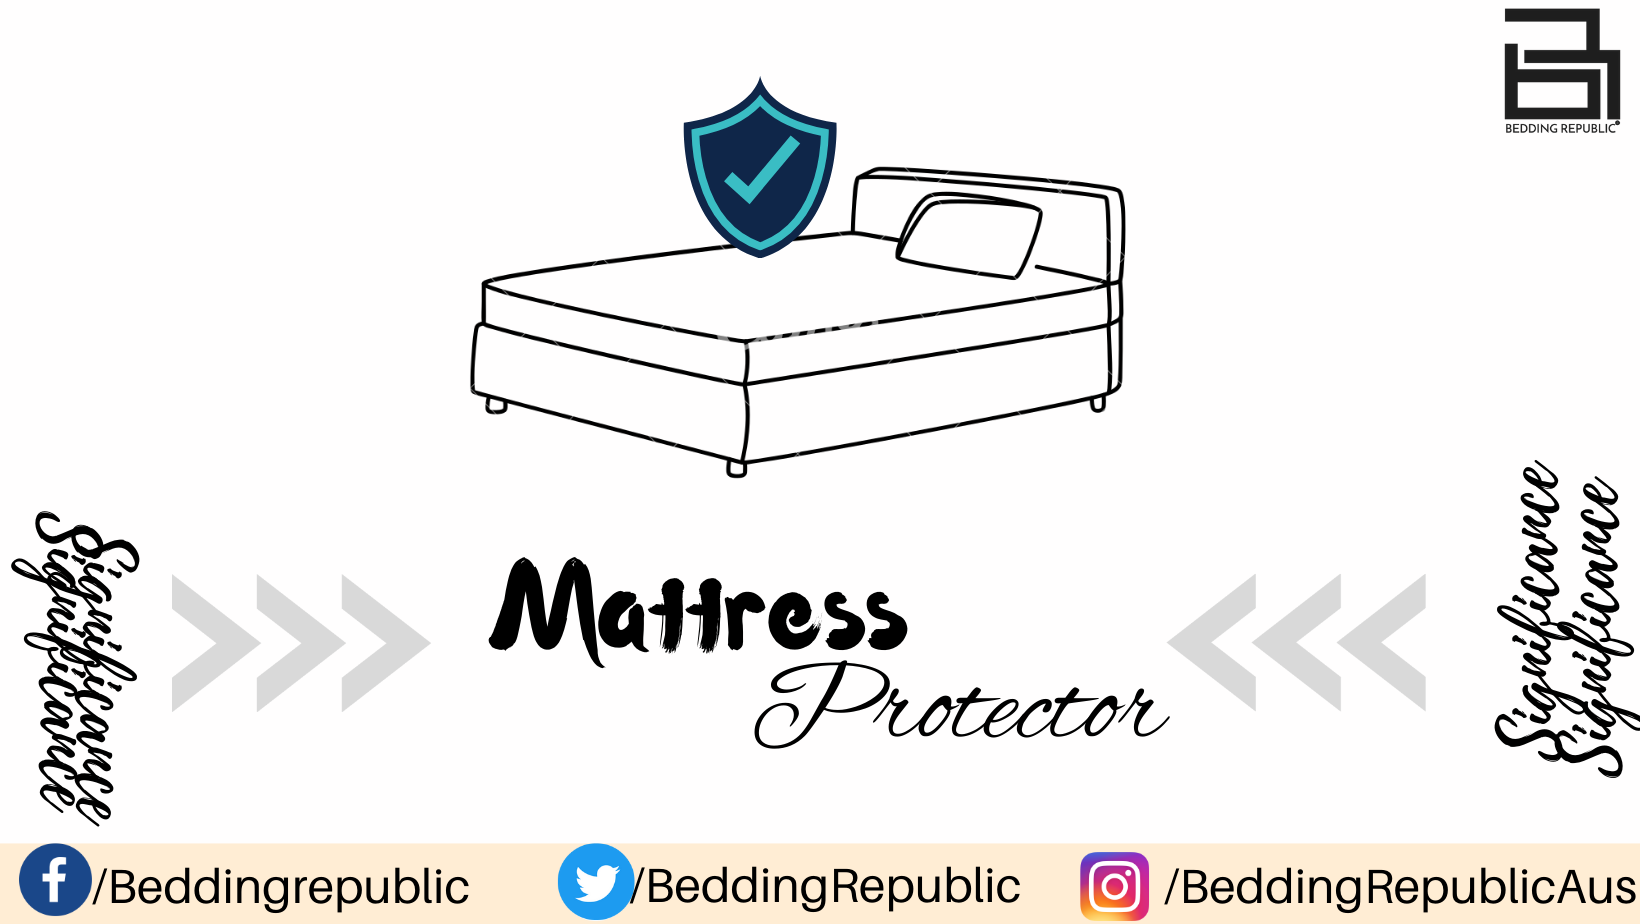 should a mattress protector be washed before use